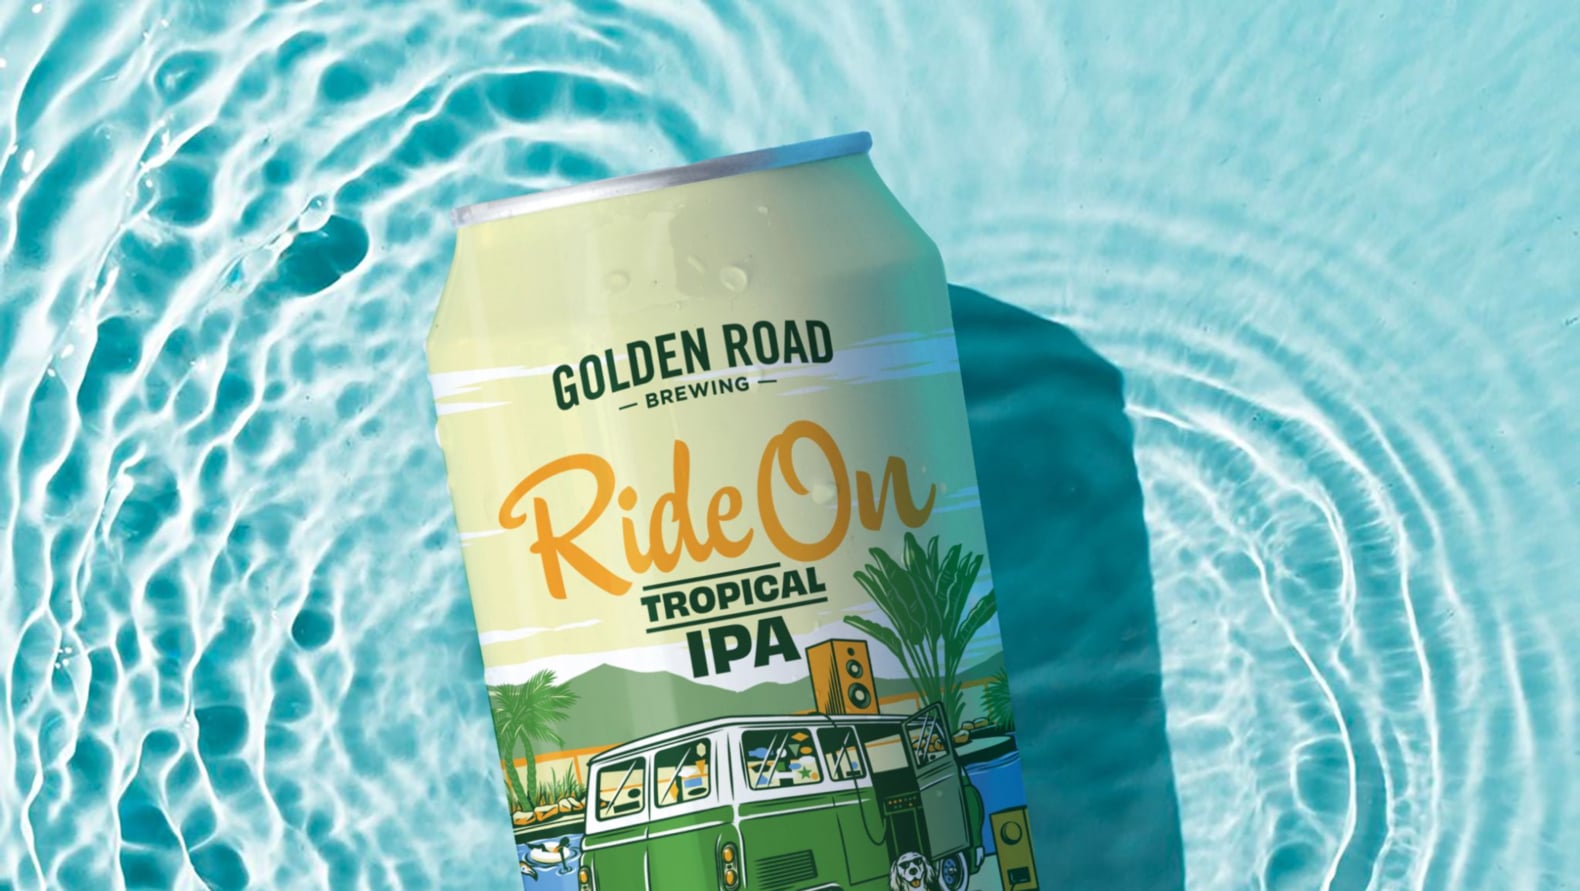 A Golden Road beer can lays in a pool of water. The can is greenish yellow with an illustration of a vintage green van parked next to a pool. The van has vintage speakers attached to its radio. A dog sits next to the van, implausibly wearing sunglasses and a Hawaiian shirt. The beer name "Ride On Tropic IPA" is shown in playful orange script and dark green block letters.